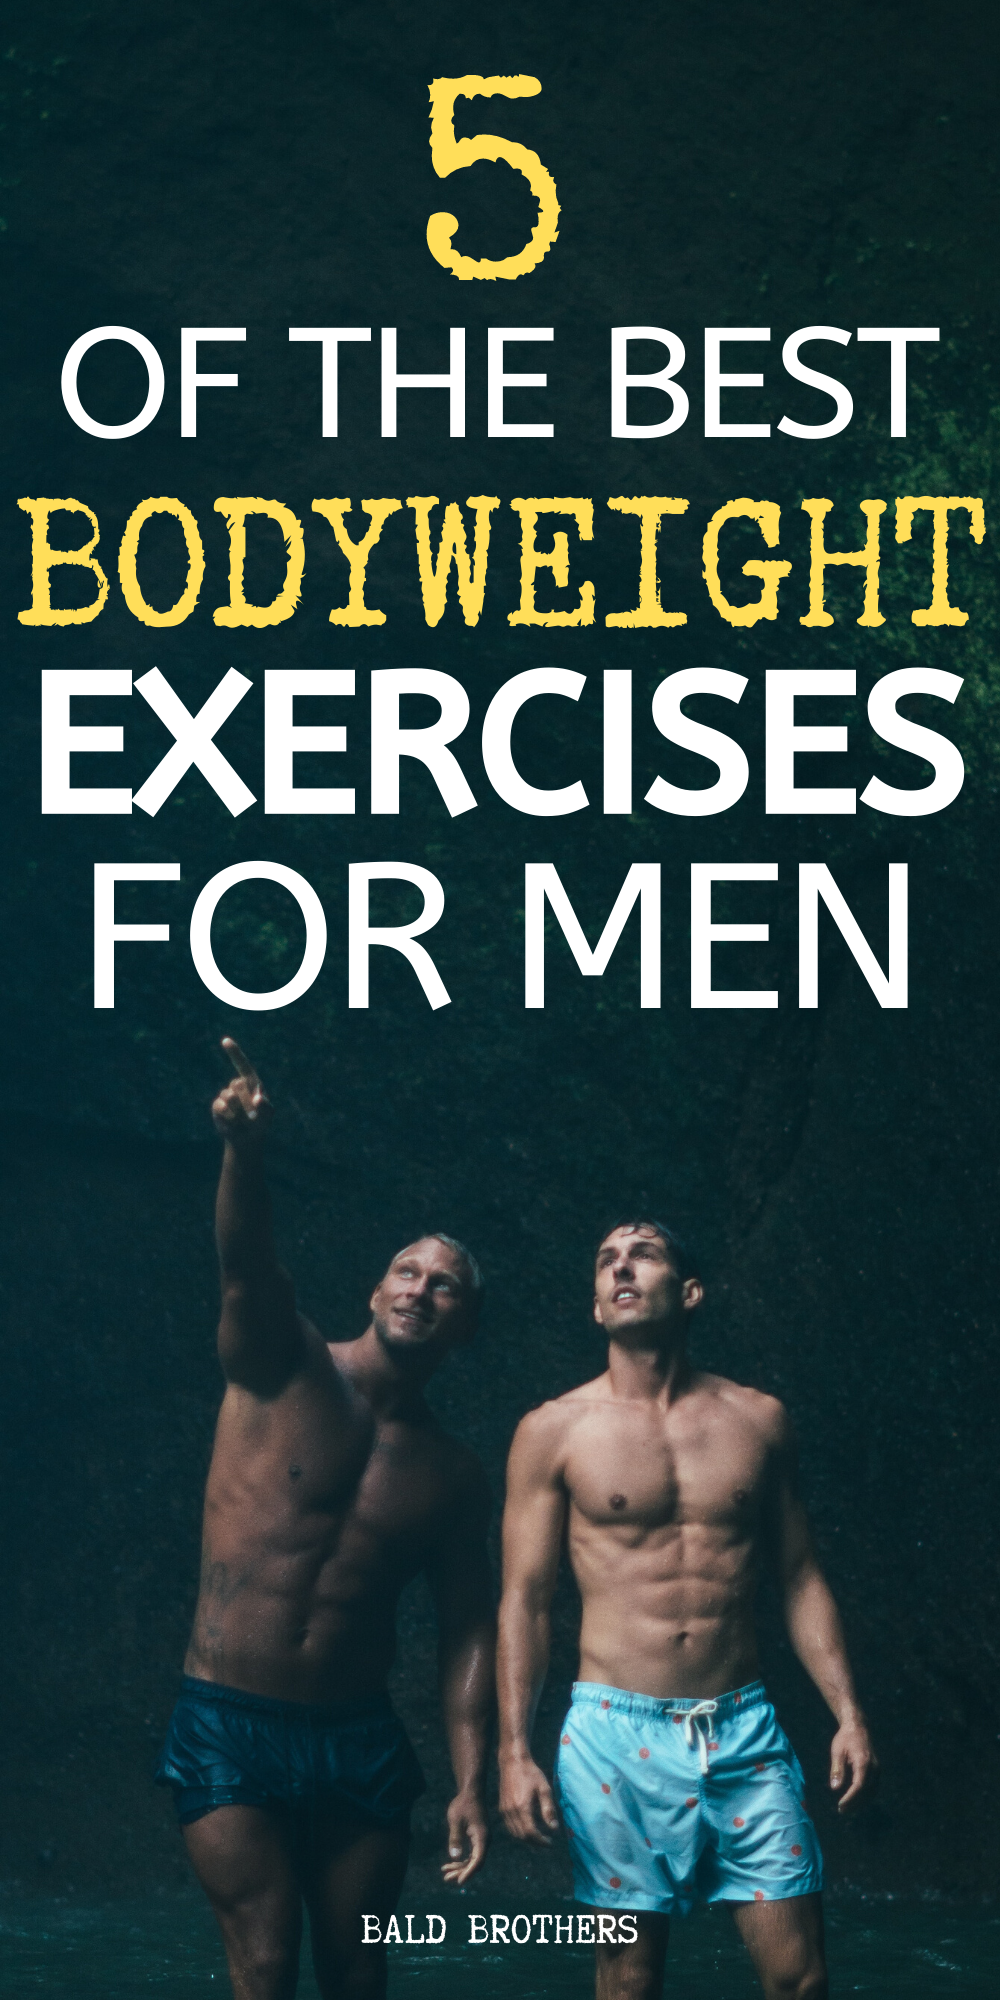 5 Bodyweight Exercises For Men That Anyone Can Master - 5 Bodyweight Exercises For Men That Anyone Can Master -   15 fitness Men motivation ideas